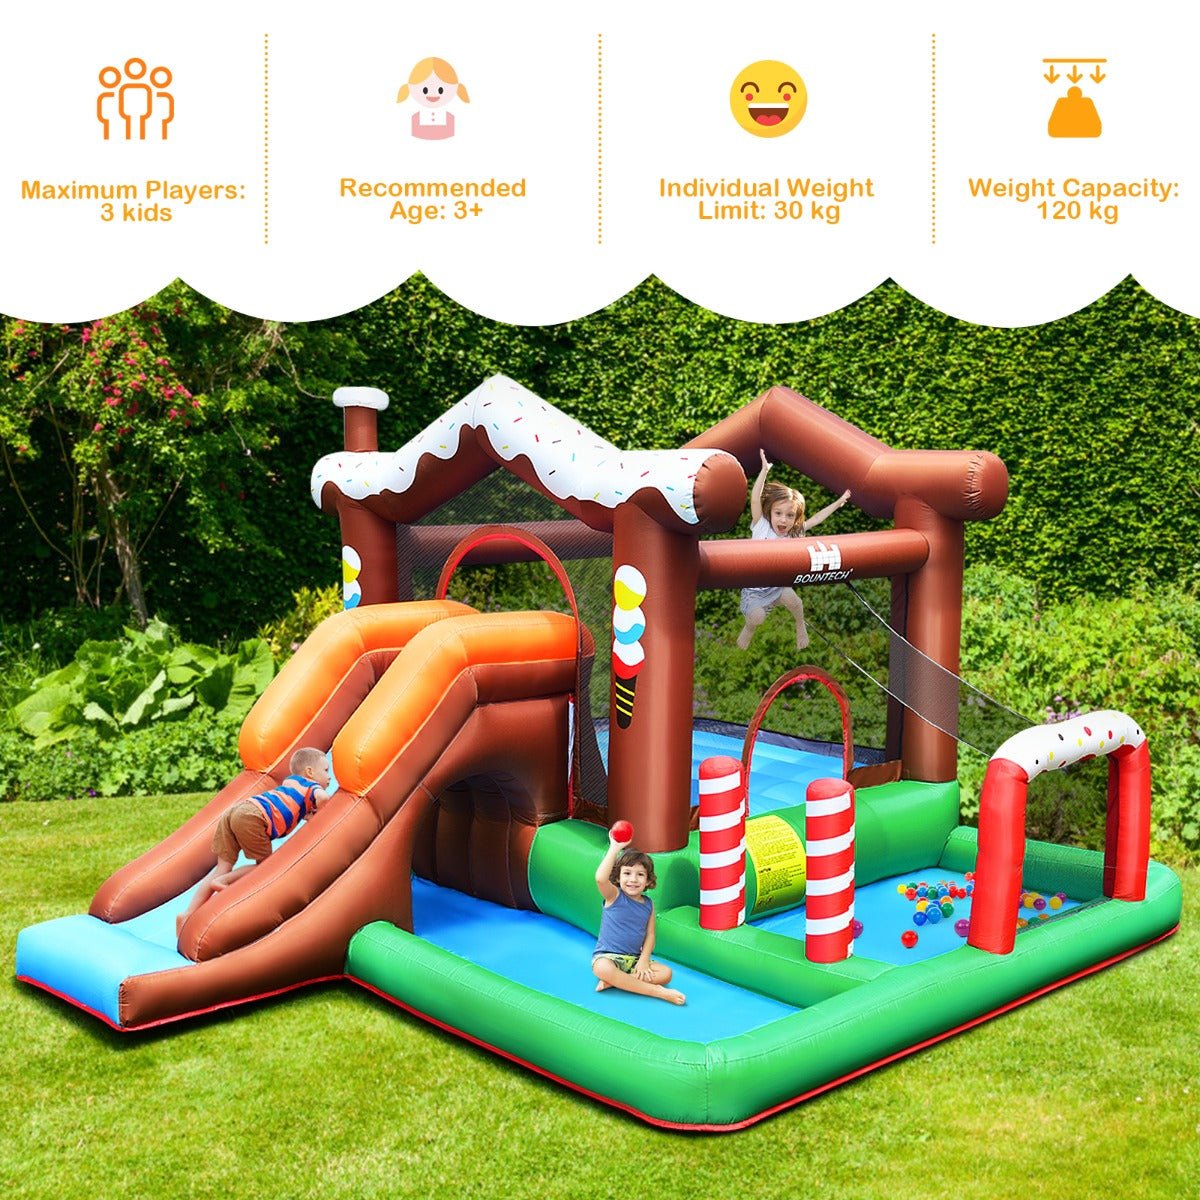 Children's Inflatable Bounce Castle - Slide Park Excitement (Blower Included)